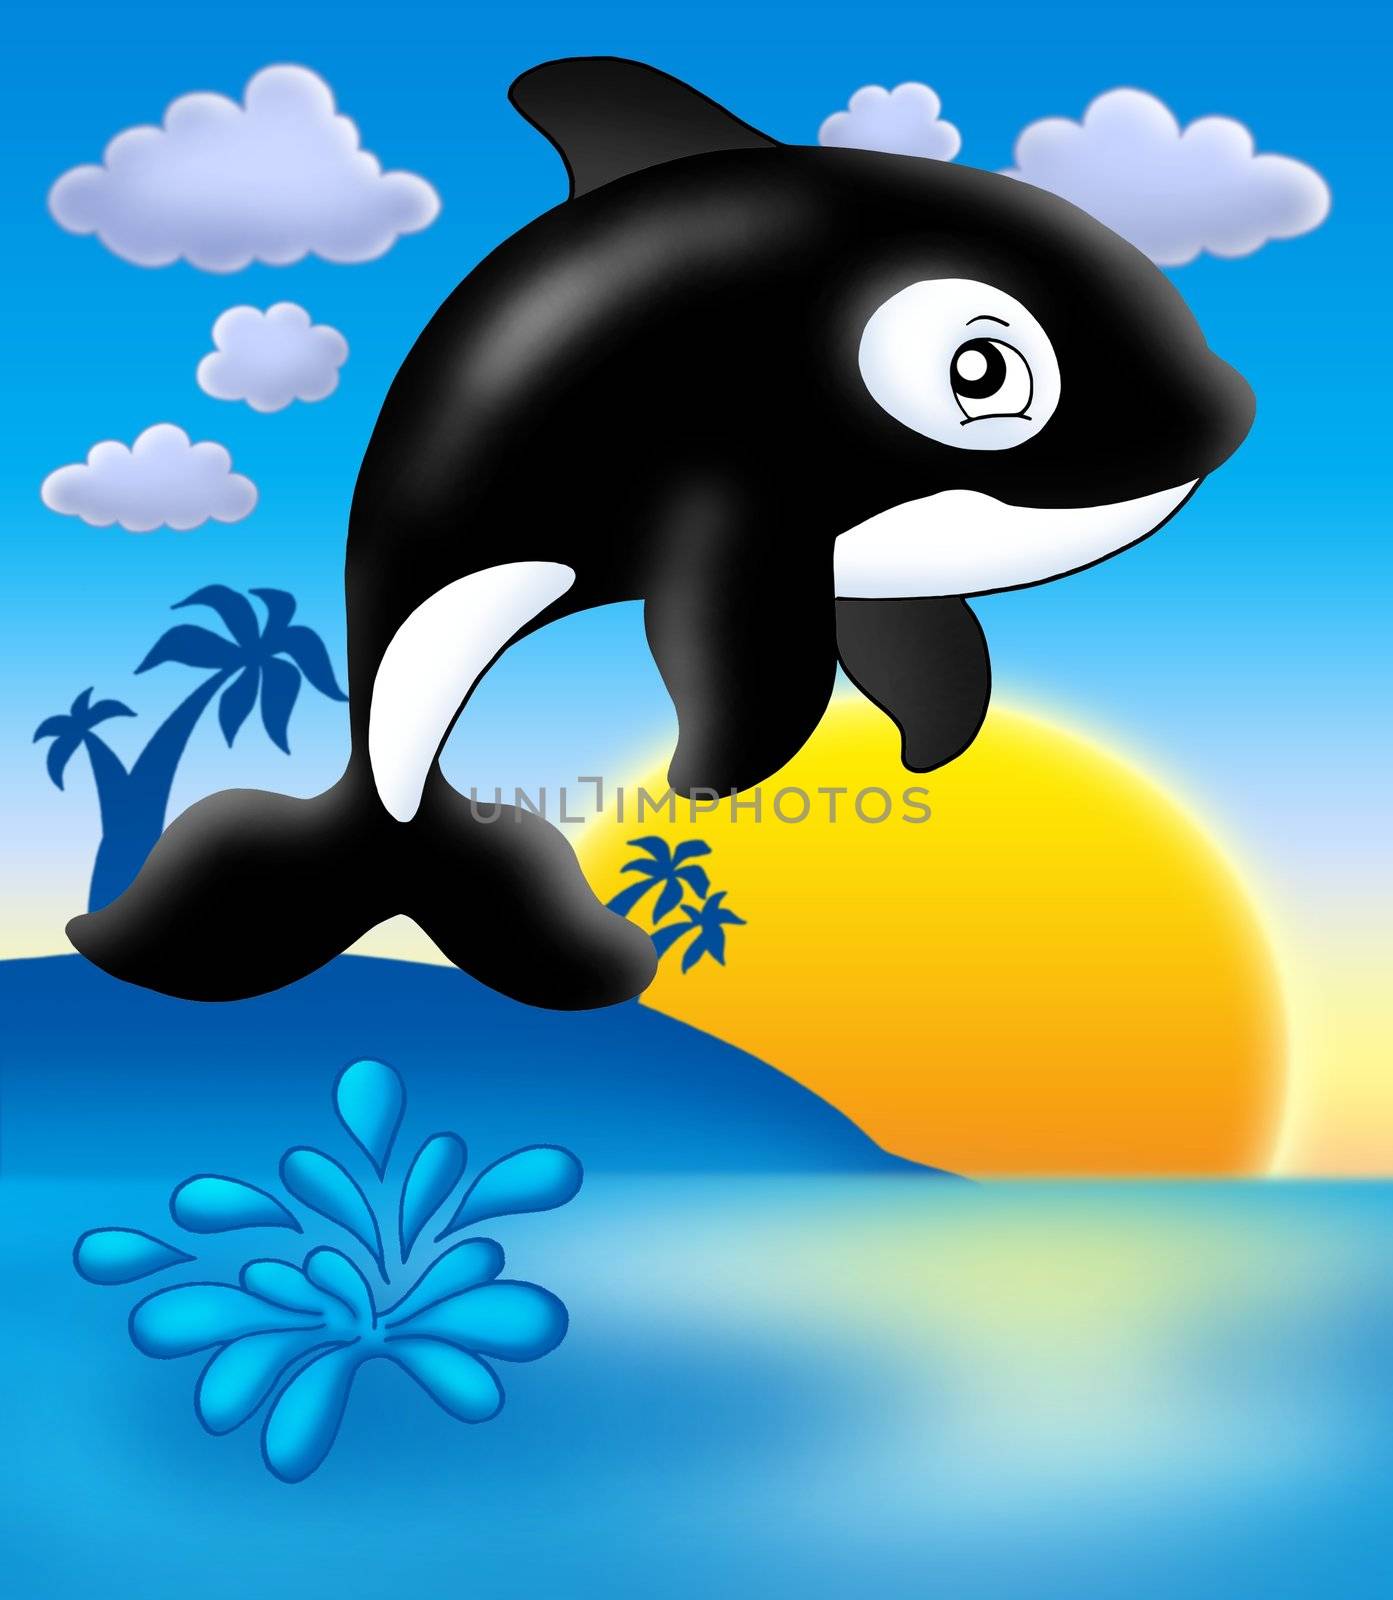 Killer whale with sunset - color illustration.